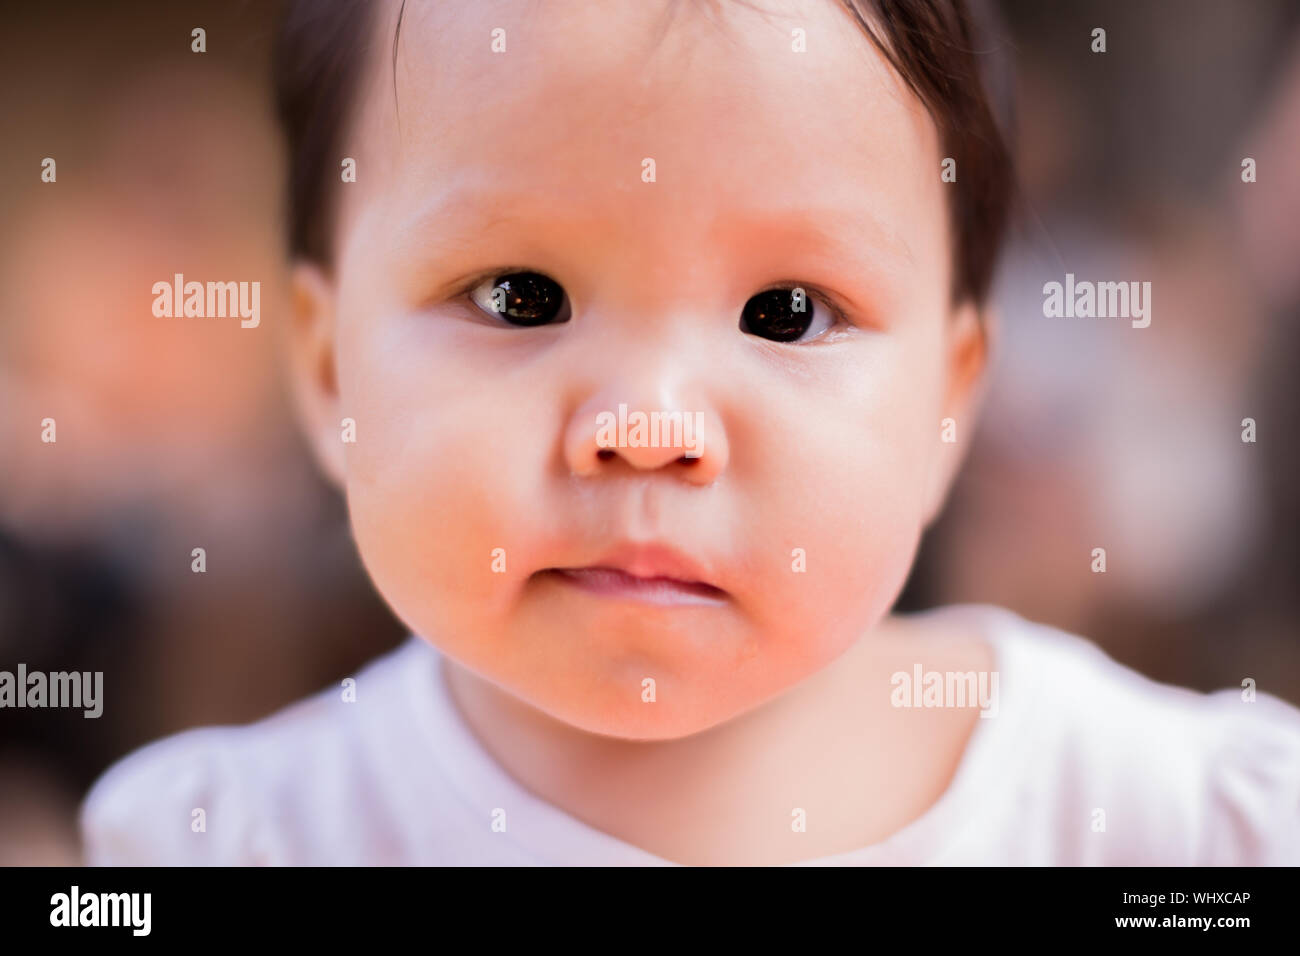 Close up shot of asian baby's face Stock Photo